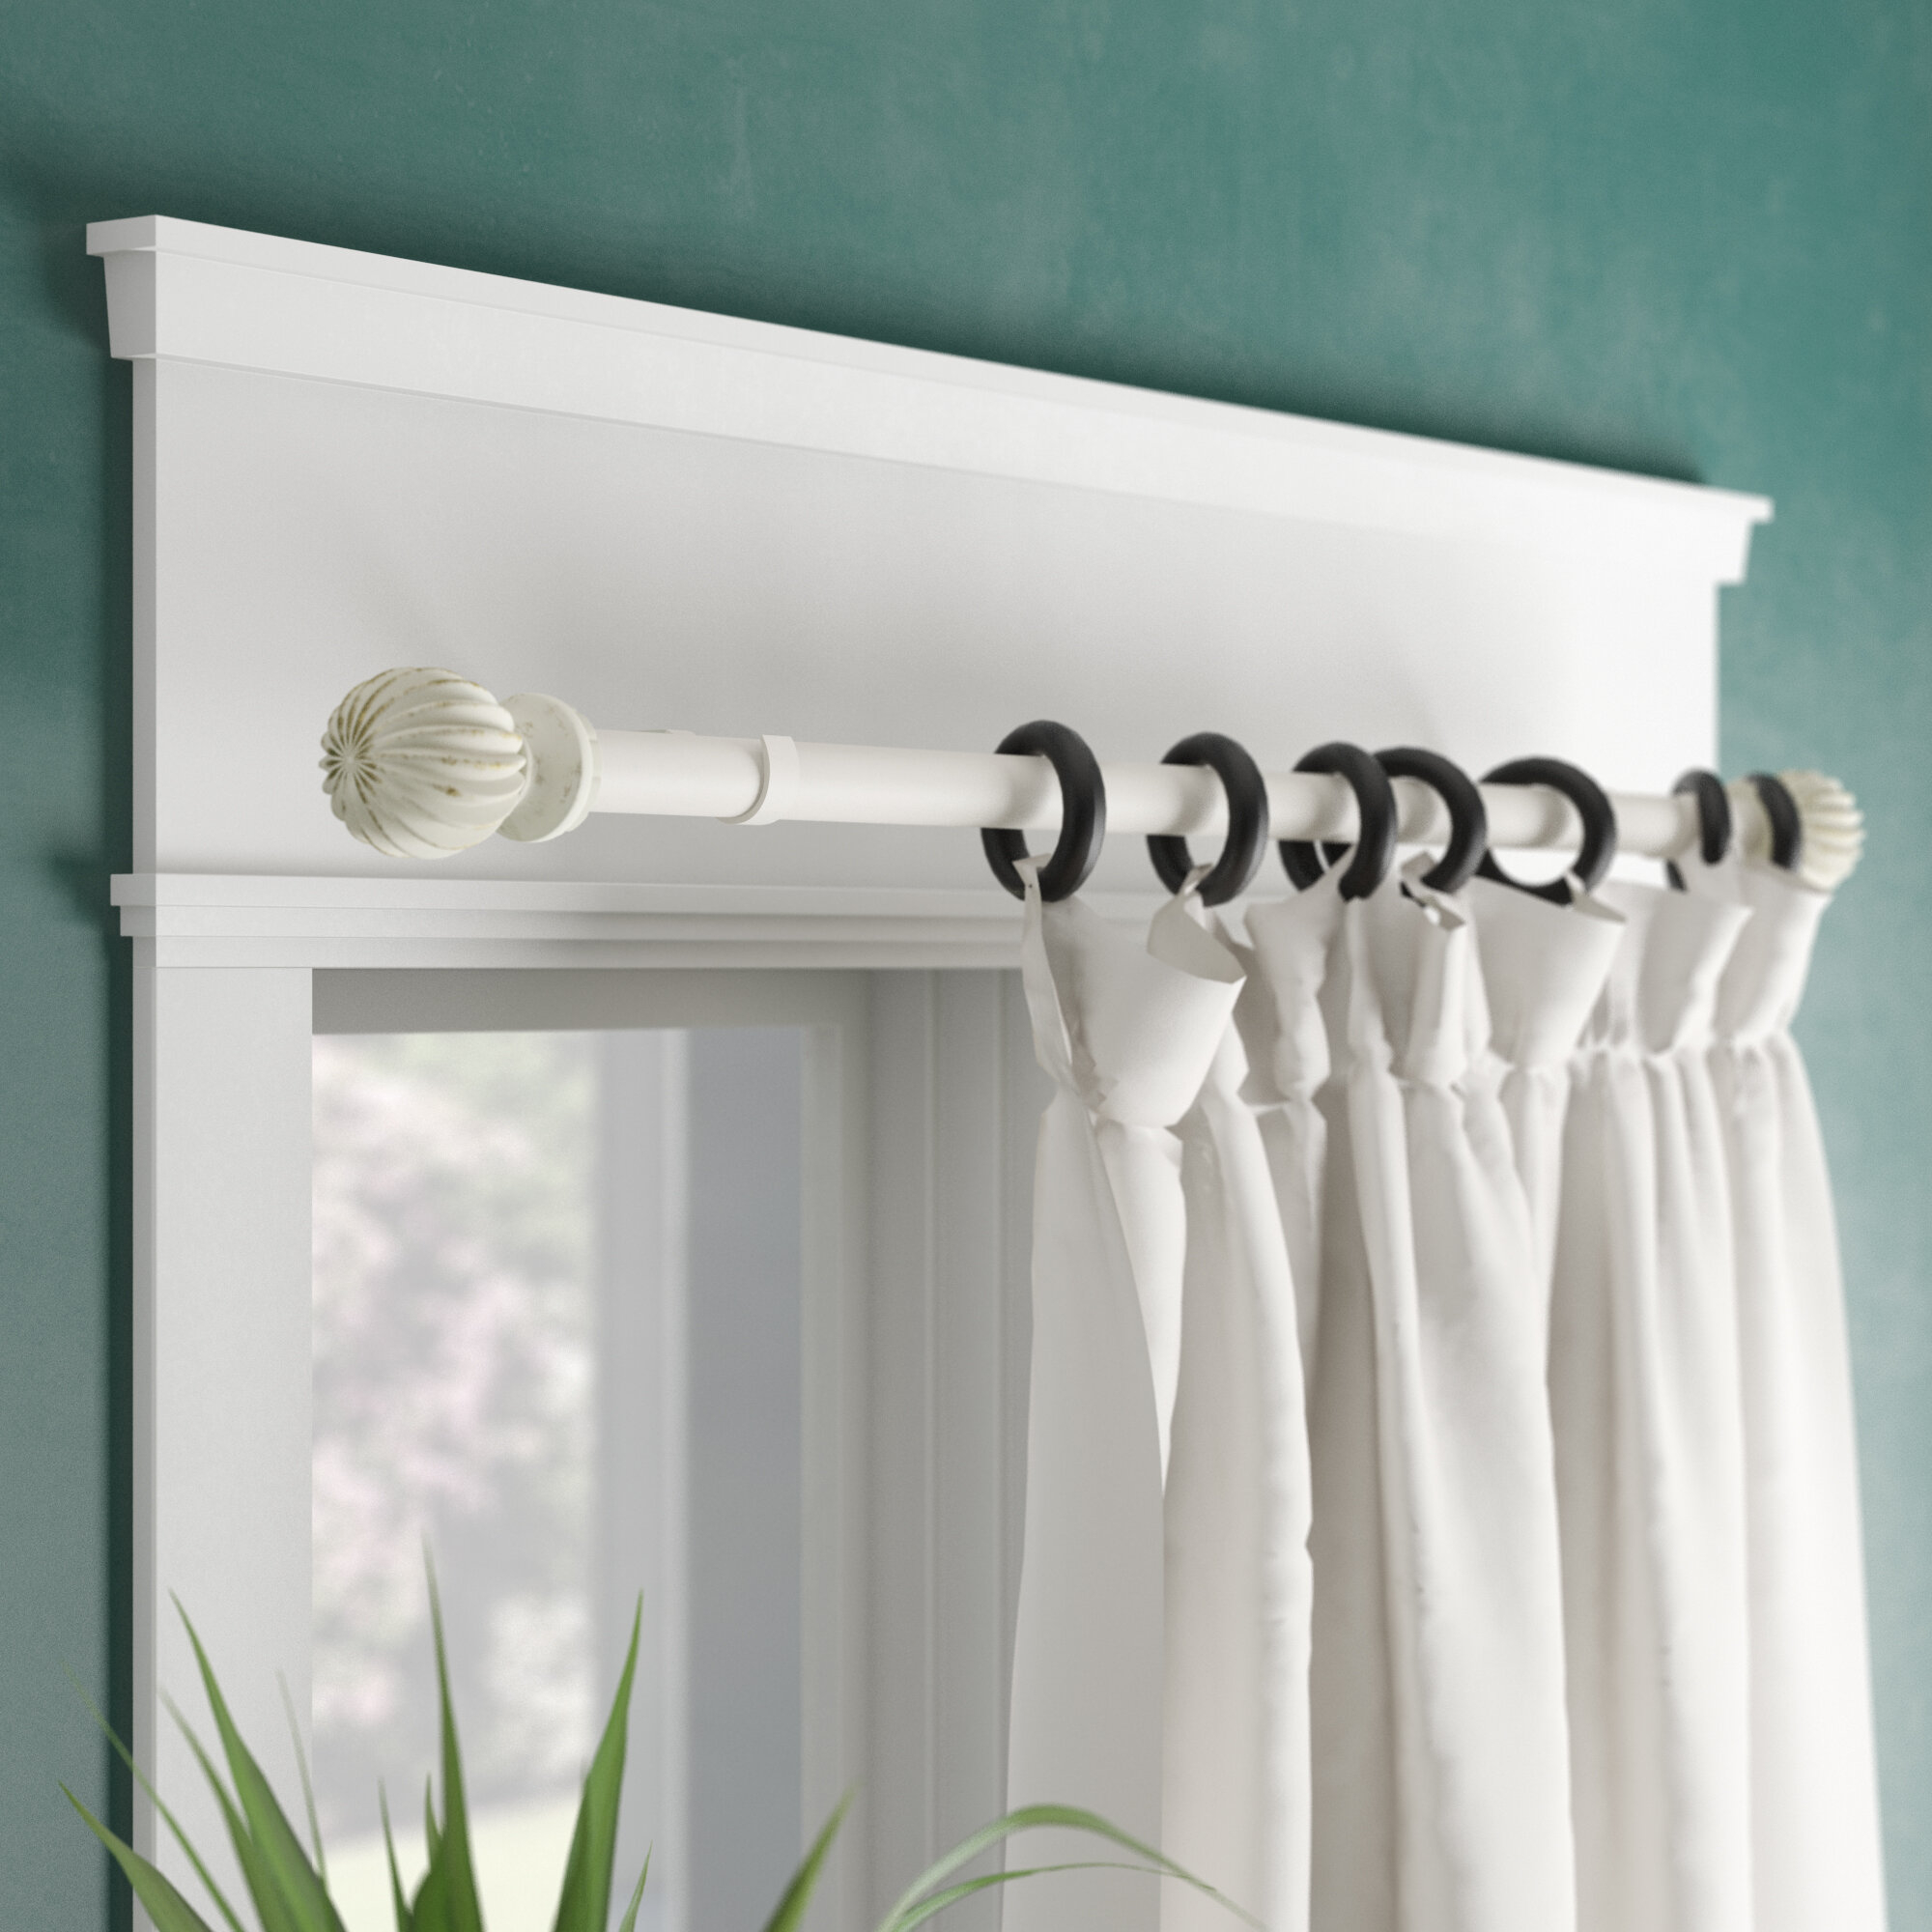 French Door Curtain Rods Visualhunt, How Does A Swing Arm Curtain Rod Work